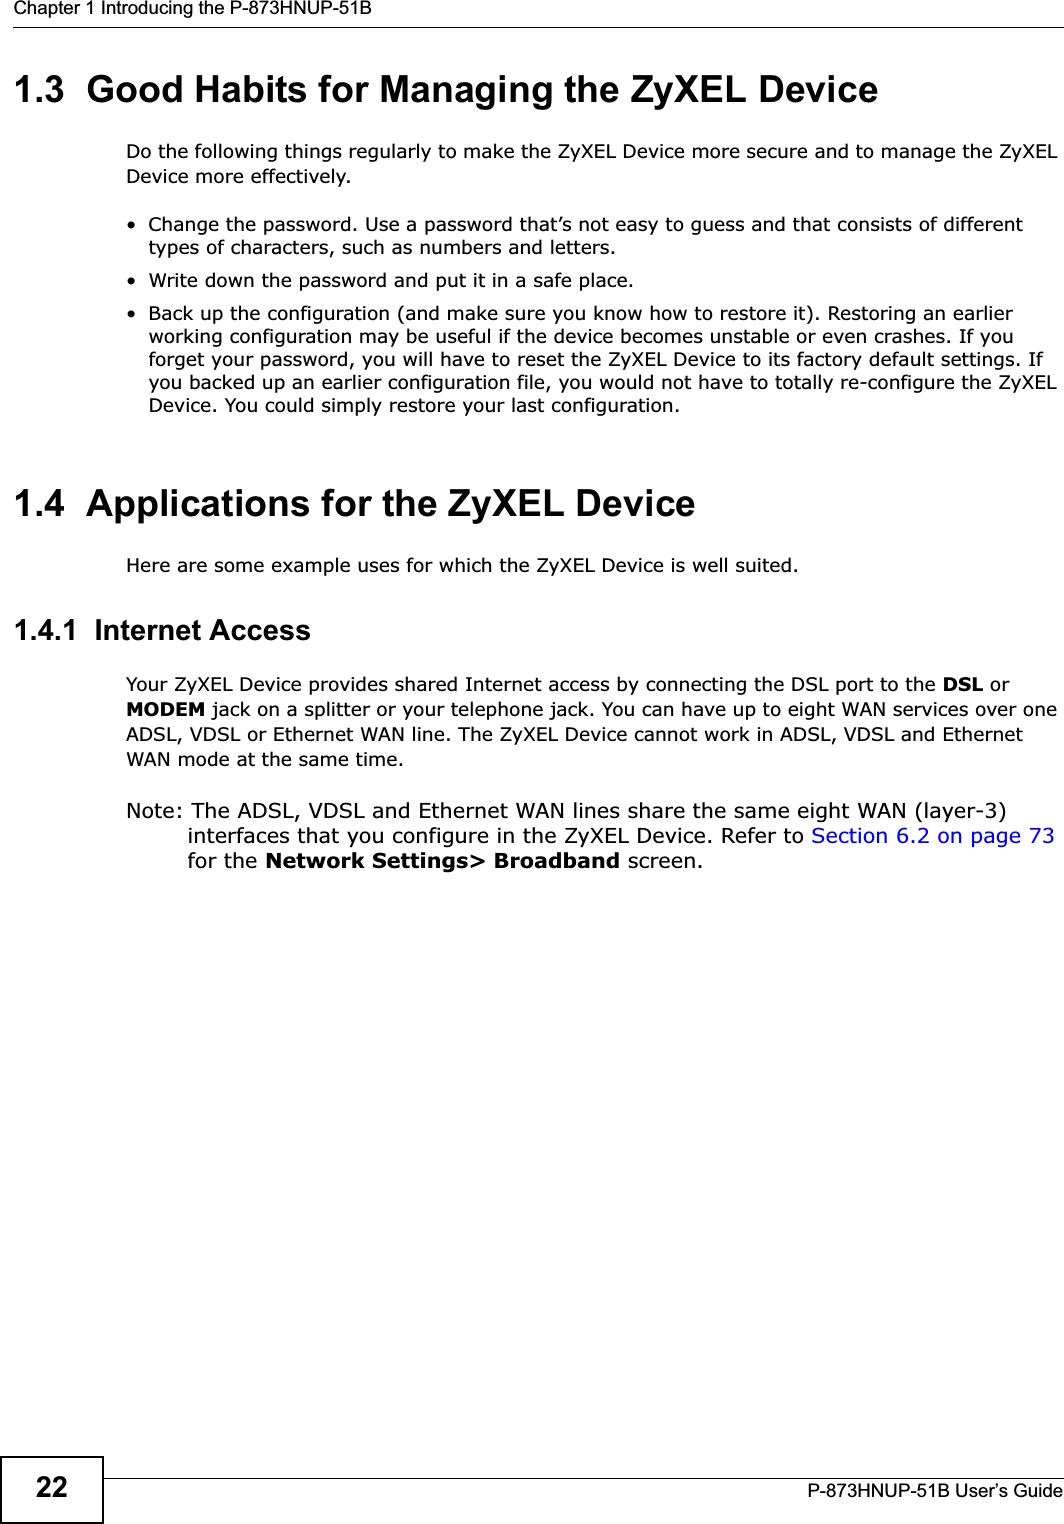 Chapter 1 Introducing the P-873HNUP-51BP-873HNUP-51B User’s Guide221.3  Good Habits for Managing the ZyXEL DeviceDo the following things regularly to make the ZyXEL Device more secure and to manage the ZyXEL Device more effectively.• Change the password. Use a password that’s not easy to guess and that consists of different types of characters, such as numbers and letters.• Write down the password and put it in a safe place.• Back up the configuration (and make sure you know how to restore it). Restoring an earlier working configuration may be useful if the device becomes unstable or even crashes. If you forget your password, you will have to reset the ZyXEL Device to its factory default settings. If you backed up an earlier configuration file, you would not have to totally re-configure the ZyXEL Device. You could simply restore your last configuration.1.4  Applications for the ZyXEL Device Here are some example uses for which the ZyXEL Device is well suited.1.4.1  Internet AccessYour ZyXEL Device provides shared Internet access by connecting the DSL port to the DSL or MODEM jack on a splitter or your telephone jack. You can have up to eight WAN services over one ADSL, VDSL or Ethernet WAN line. The ZyXEL Device cannot work in ADSL, VDSL and Ethernet WAN mode at the same time.Note: The ADSL, VDSL and Ethernet WAN lines share the same eight WAN (layer-3) interfaces that you configure in the ZyXEL Device. Refer to Section 6.2 on page 73for the Network Settings&gt; Broadband screen.